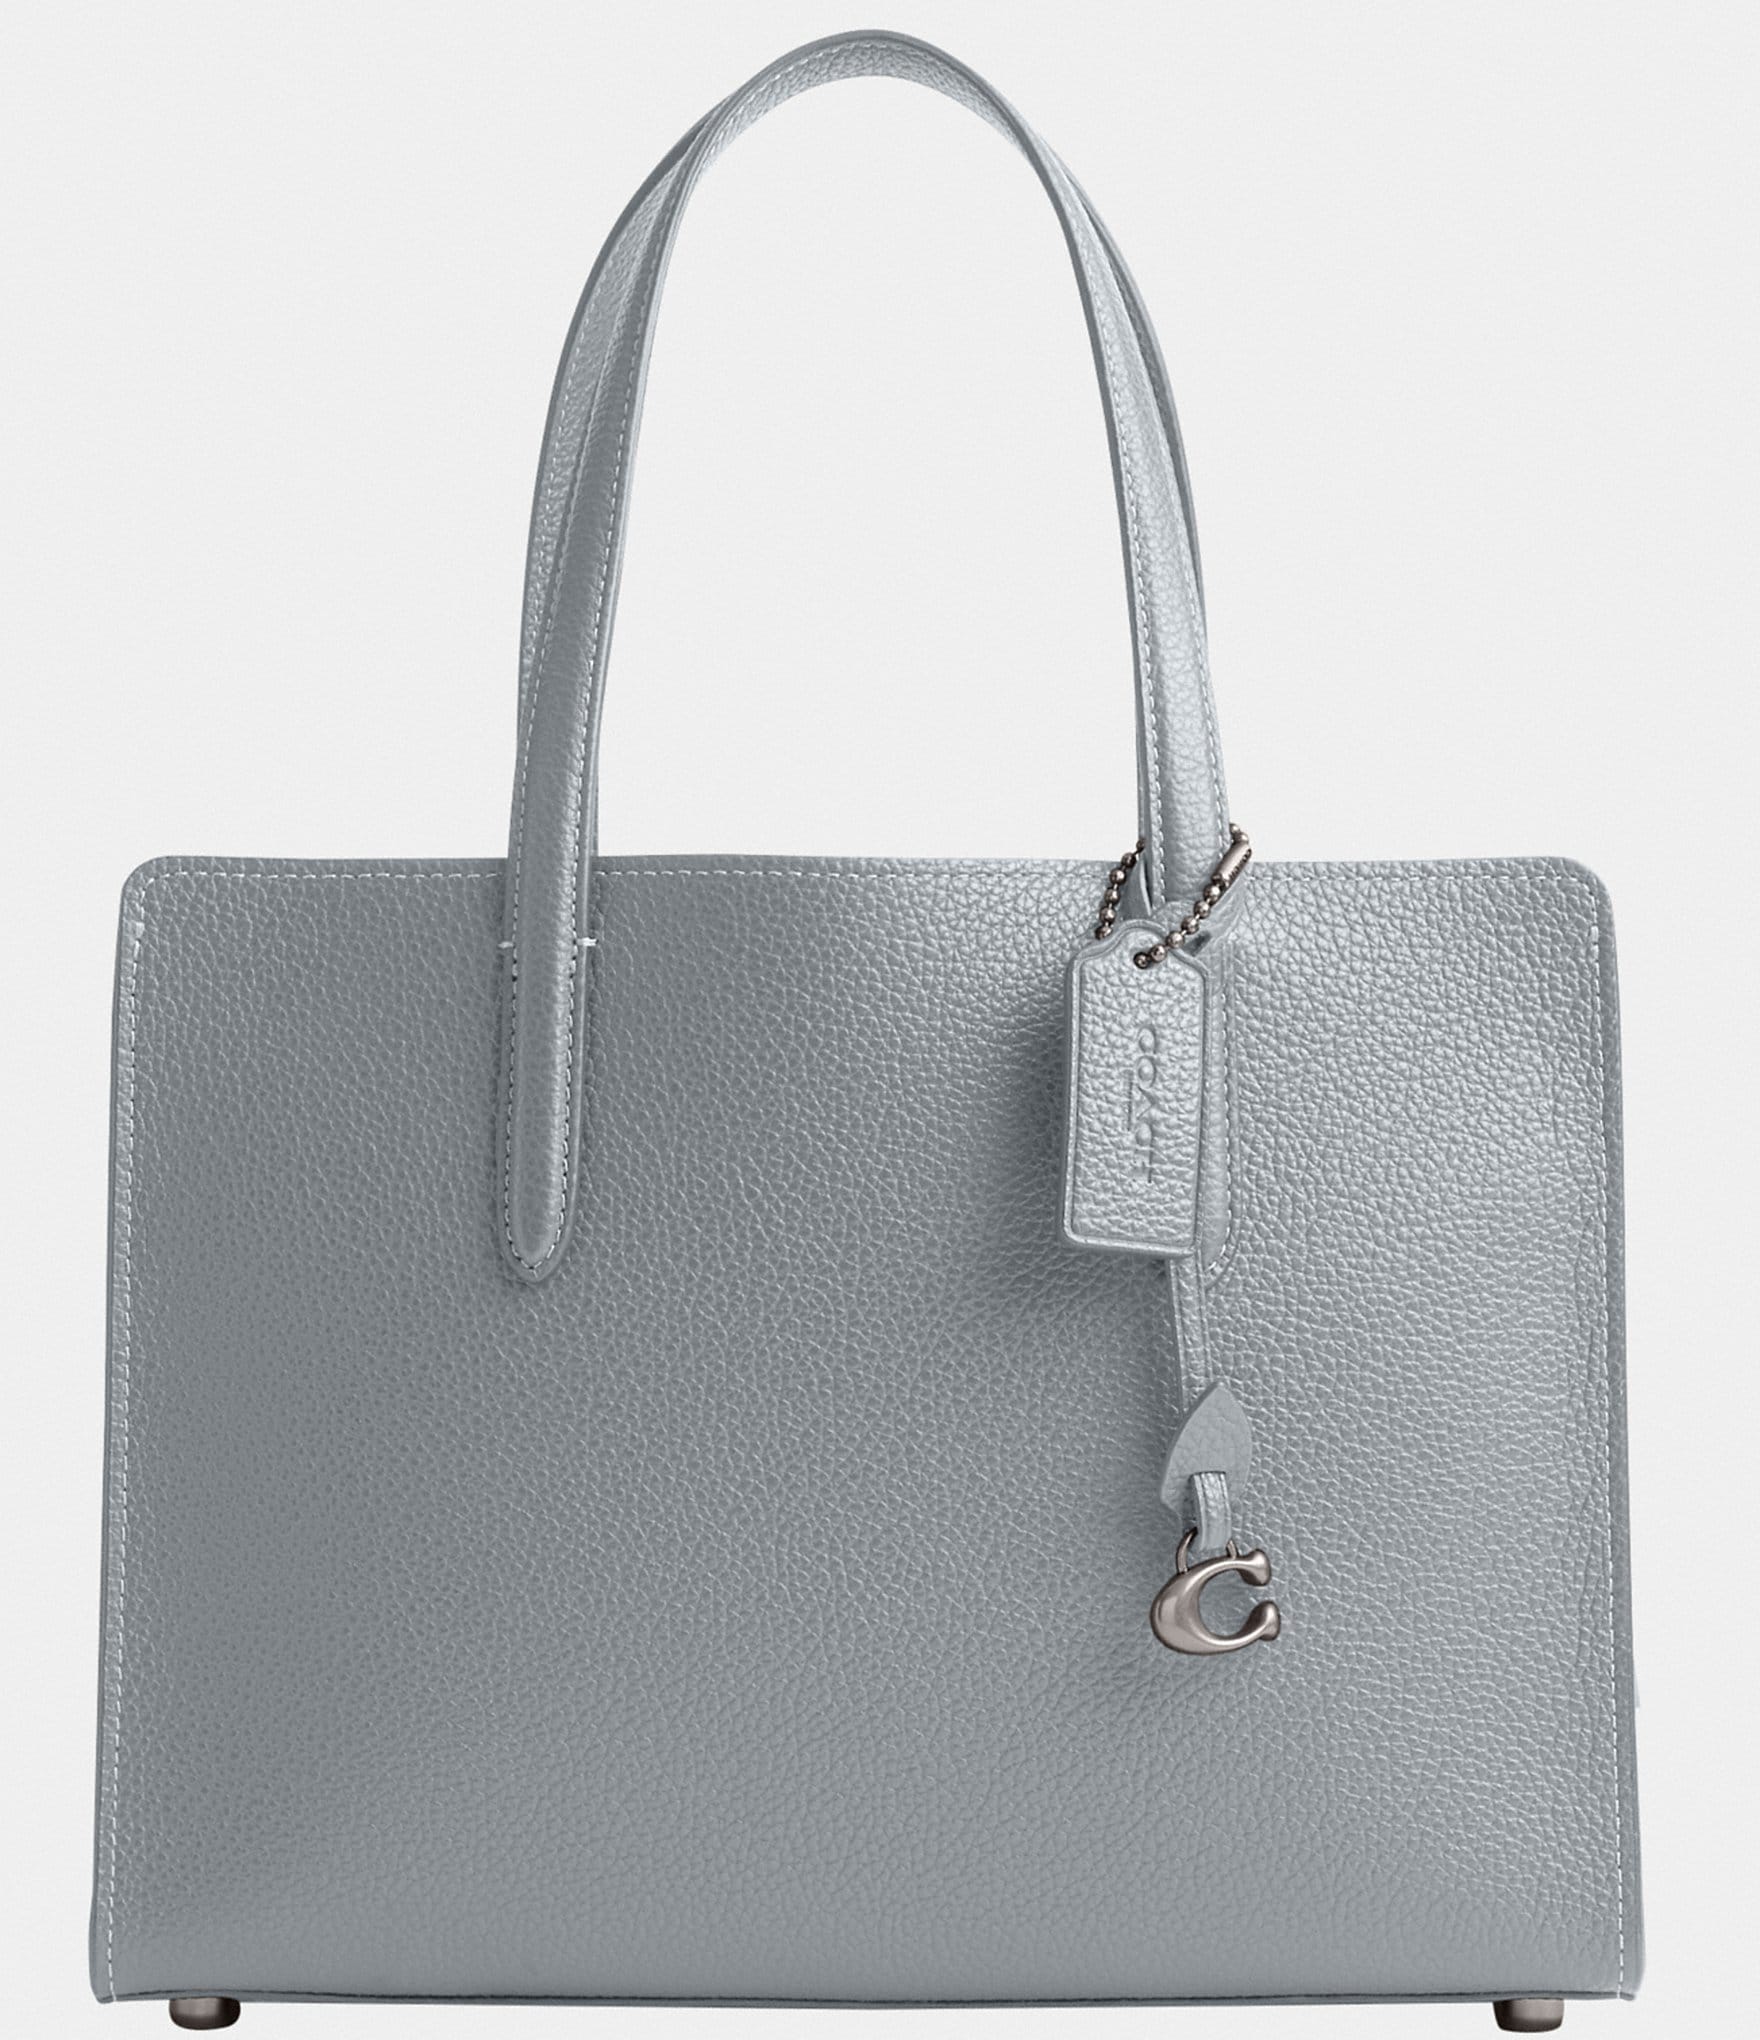 COACH Rae Colorblock Leather Tote Bag in Gray